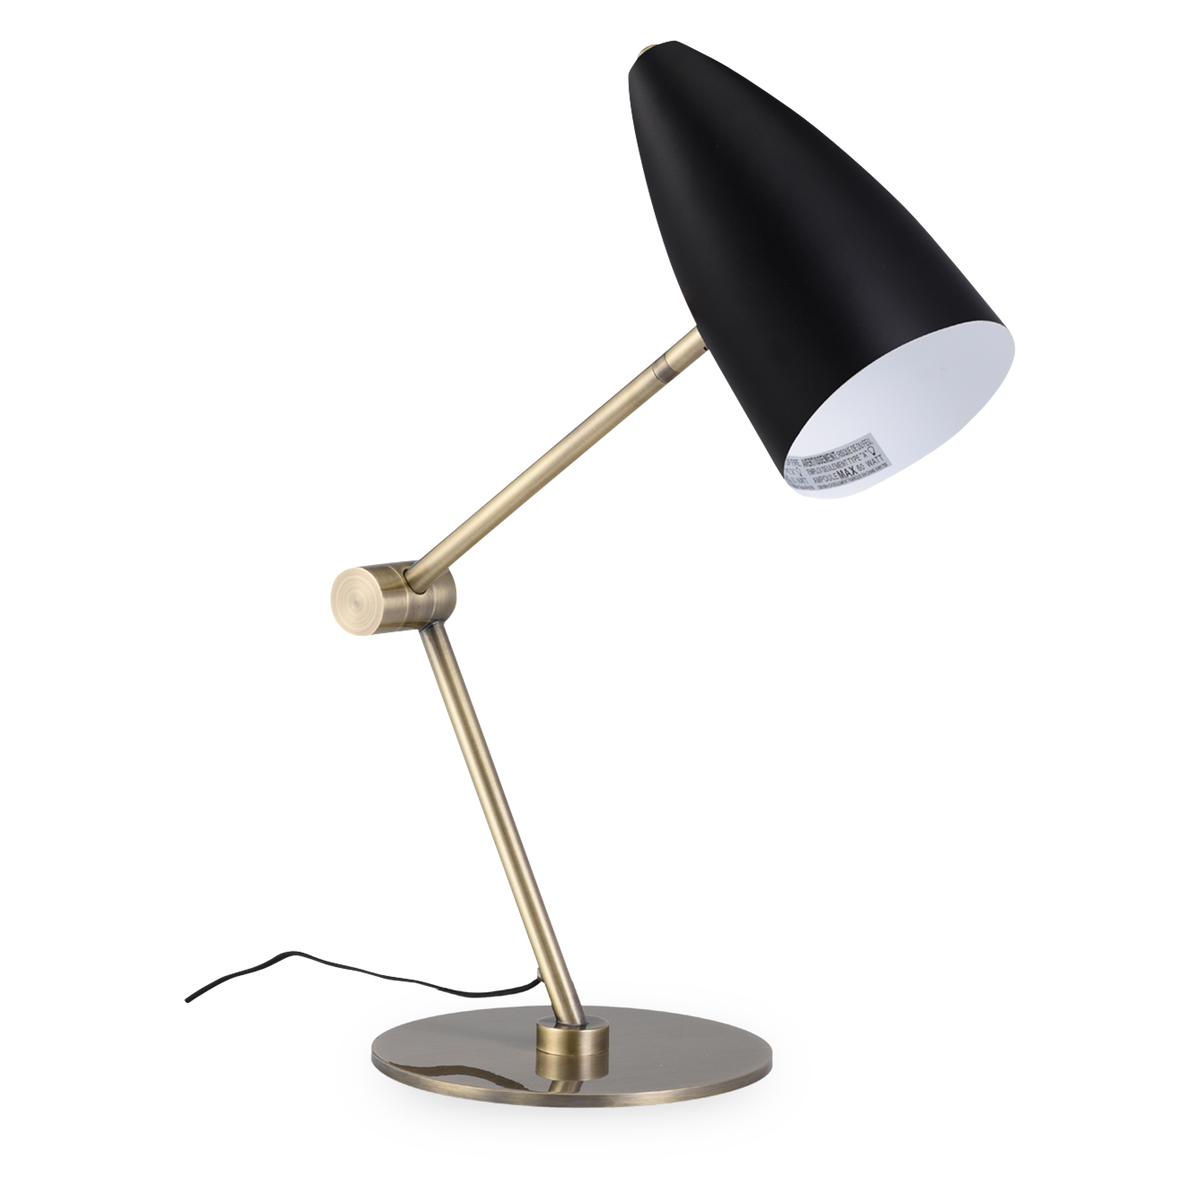 The Dexter table lamp features an adjustable metal base in rich antique brass that is perfectly complemented by a black metal shade.